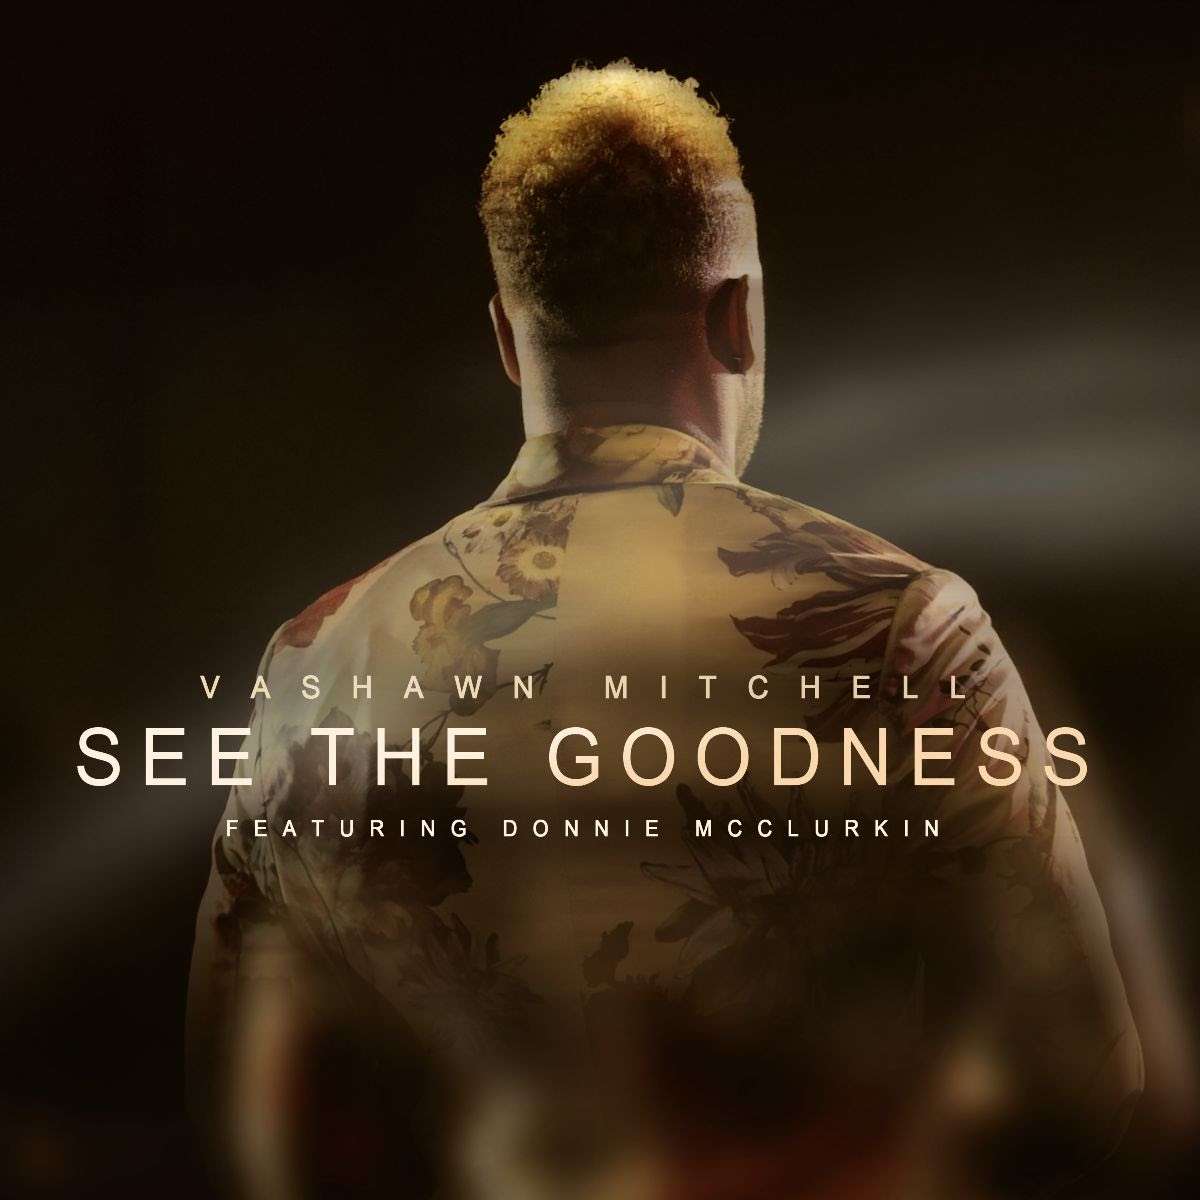 vashawn-mitchell-premieres-“see-the-goodness”-official-music-video-featuring-donnie-mcclurkin!